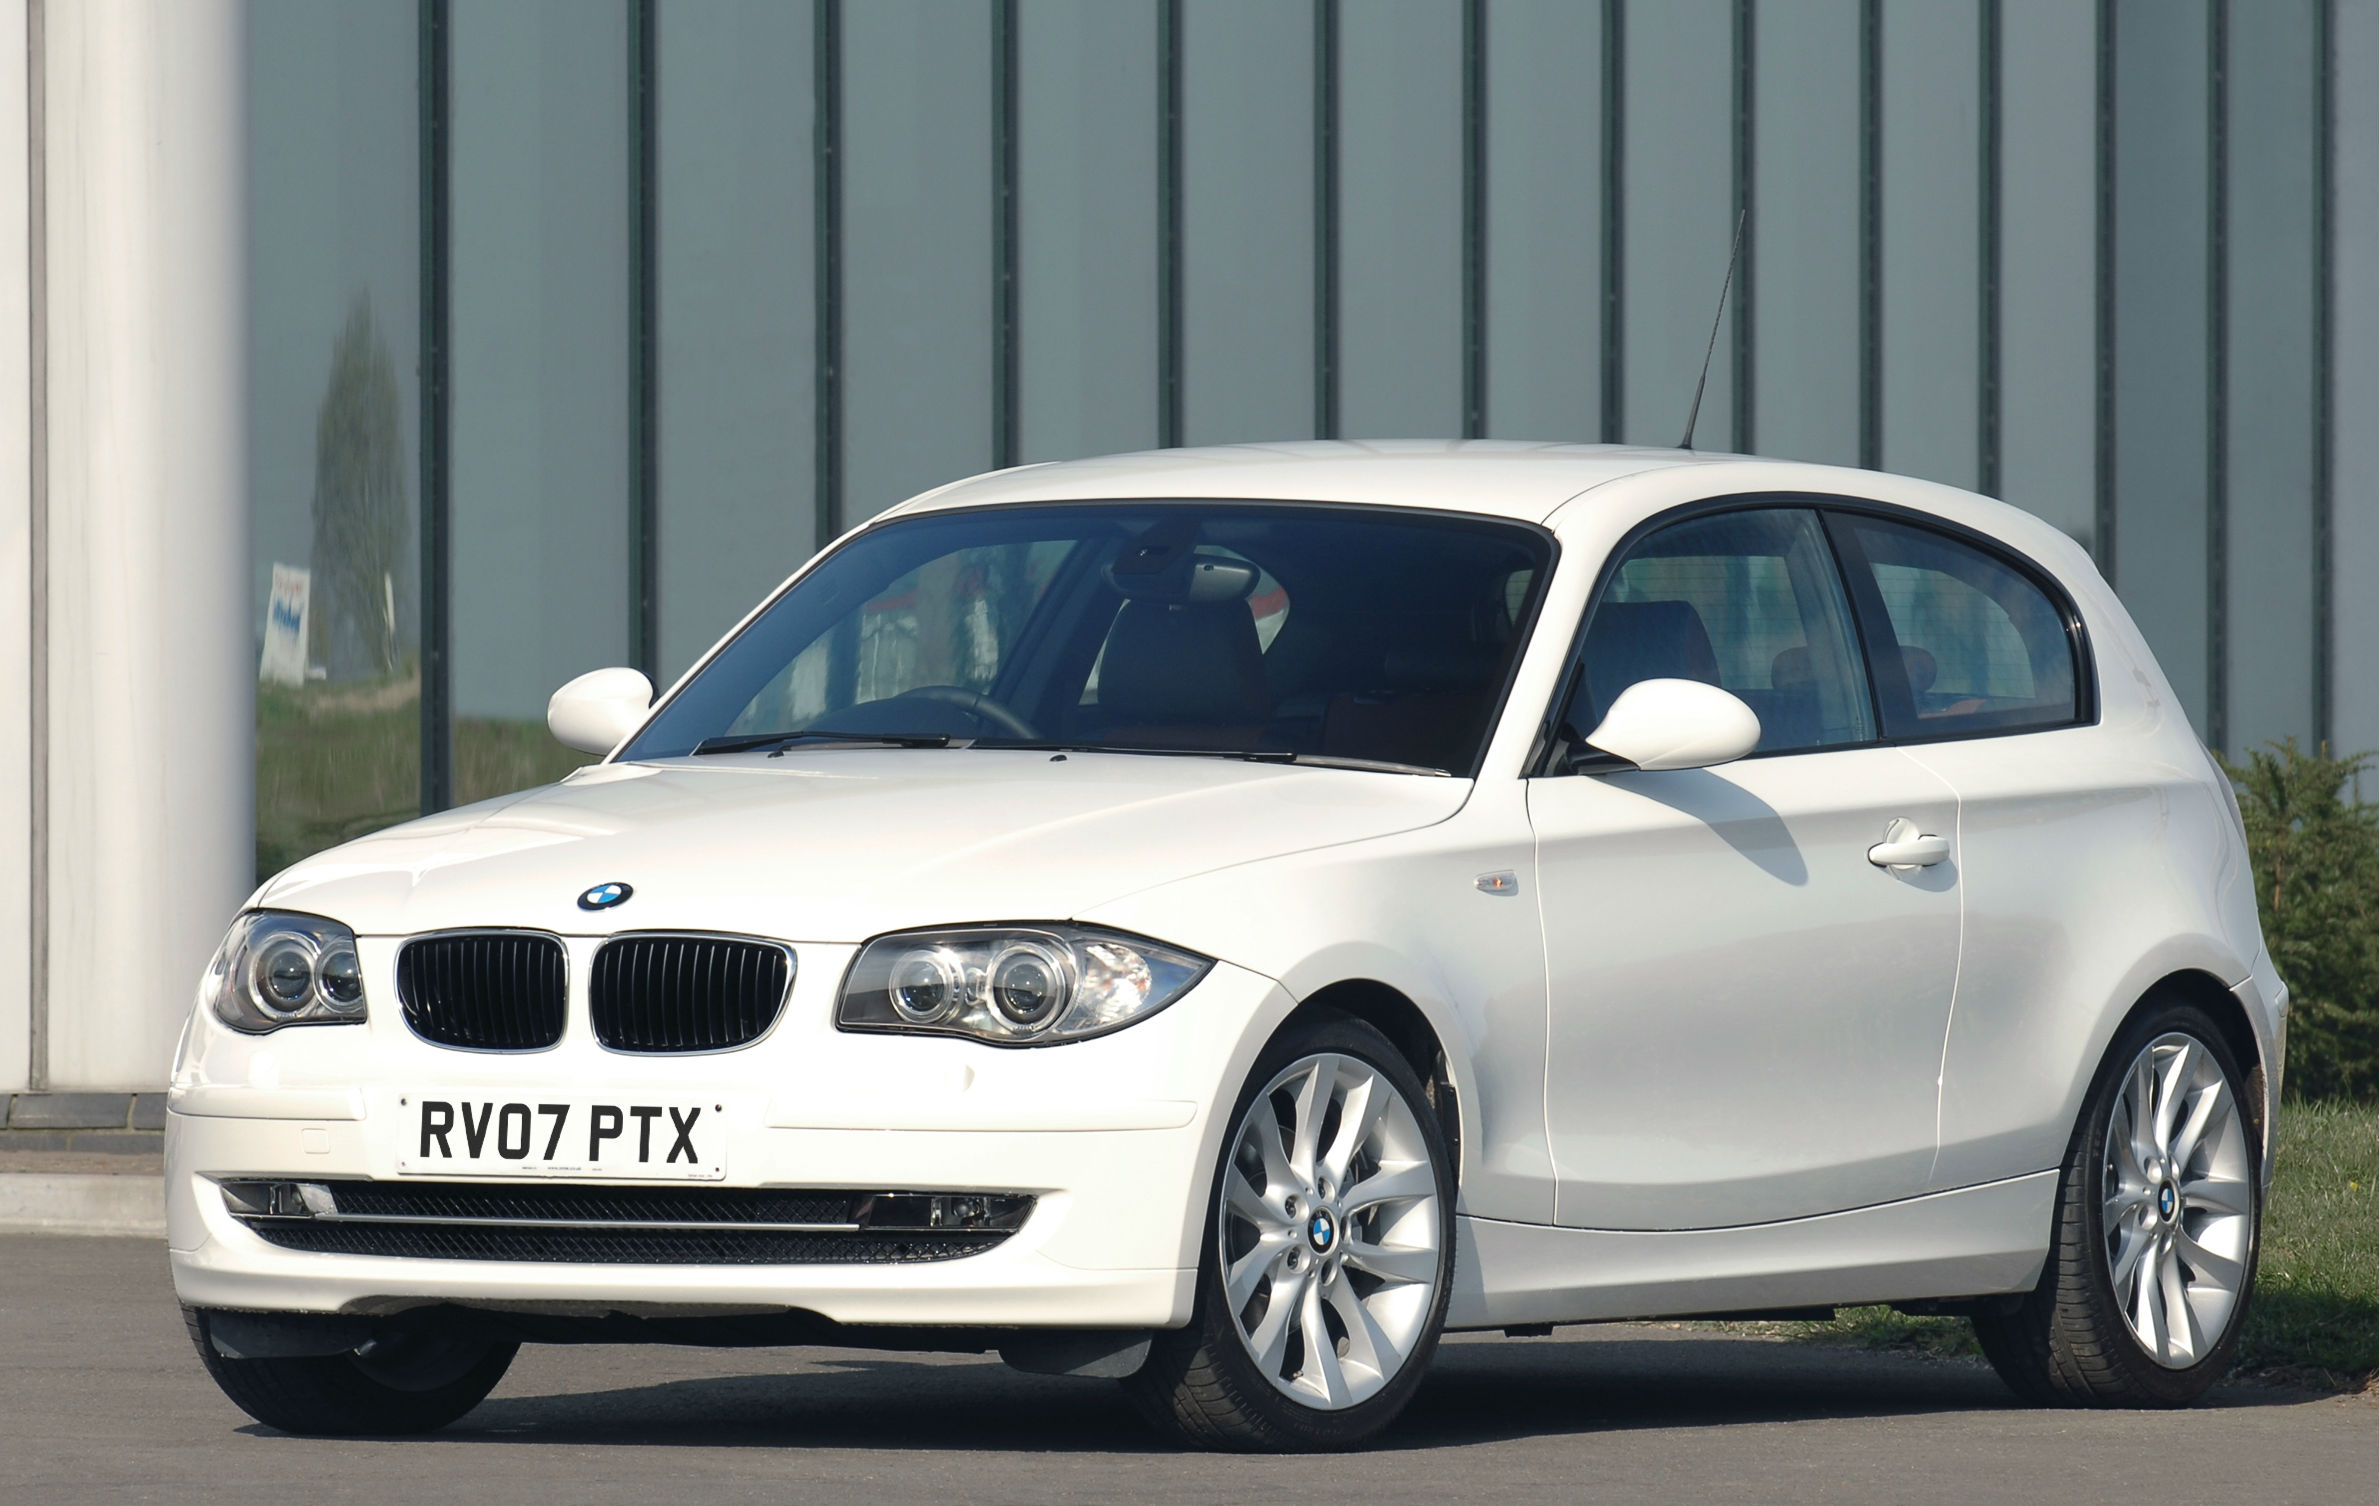 The popular BMW 1 Series is affected by the 2018 electrical issue that has prompted a recall of more than 300,000 BMWs in the UK